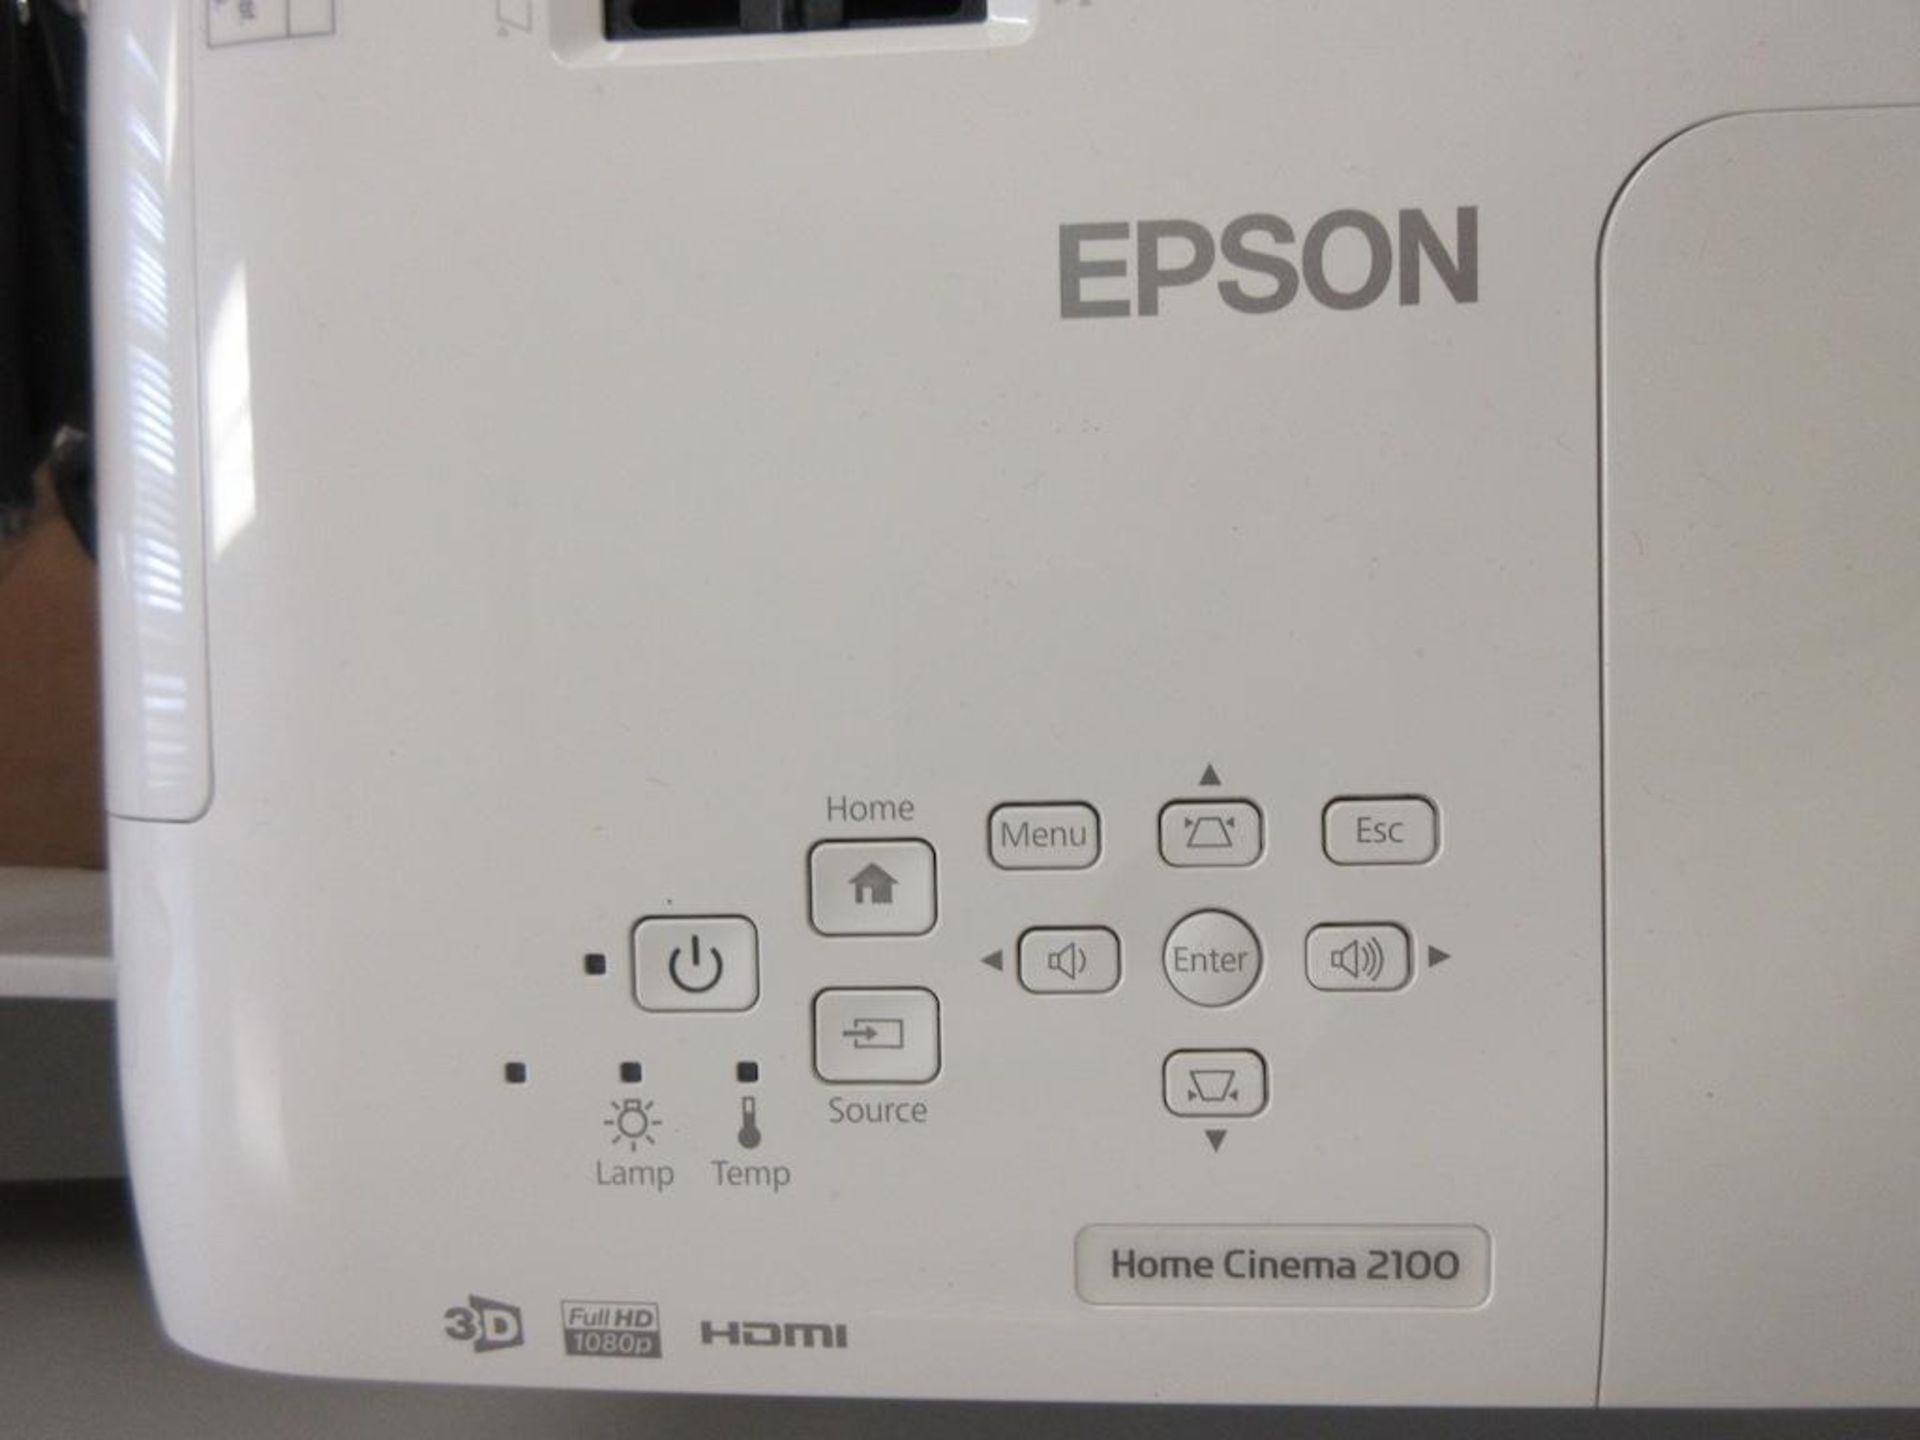 EPSON HOME CINEMA PROJECTOR MODEL H851A, POWER CORD, HDMI CABLE, REMOTE CONTROL, SN X4QP7700944, SPA - Image 2 of 3